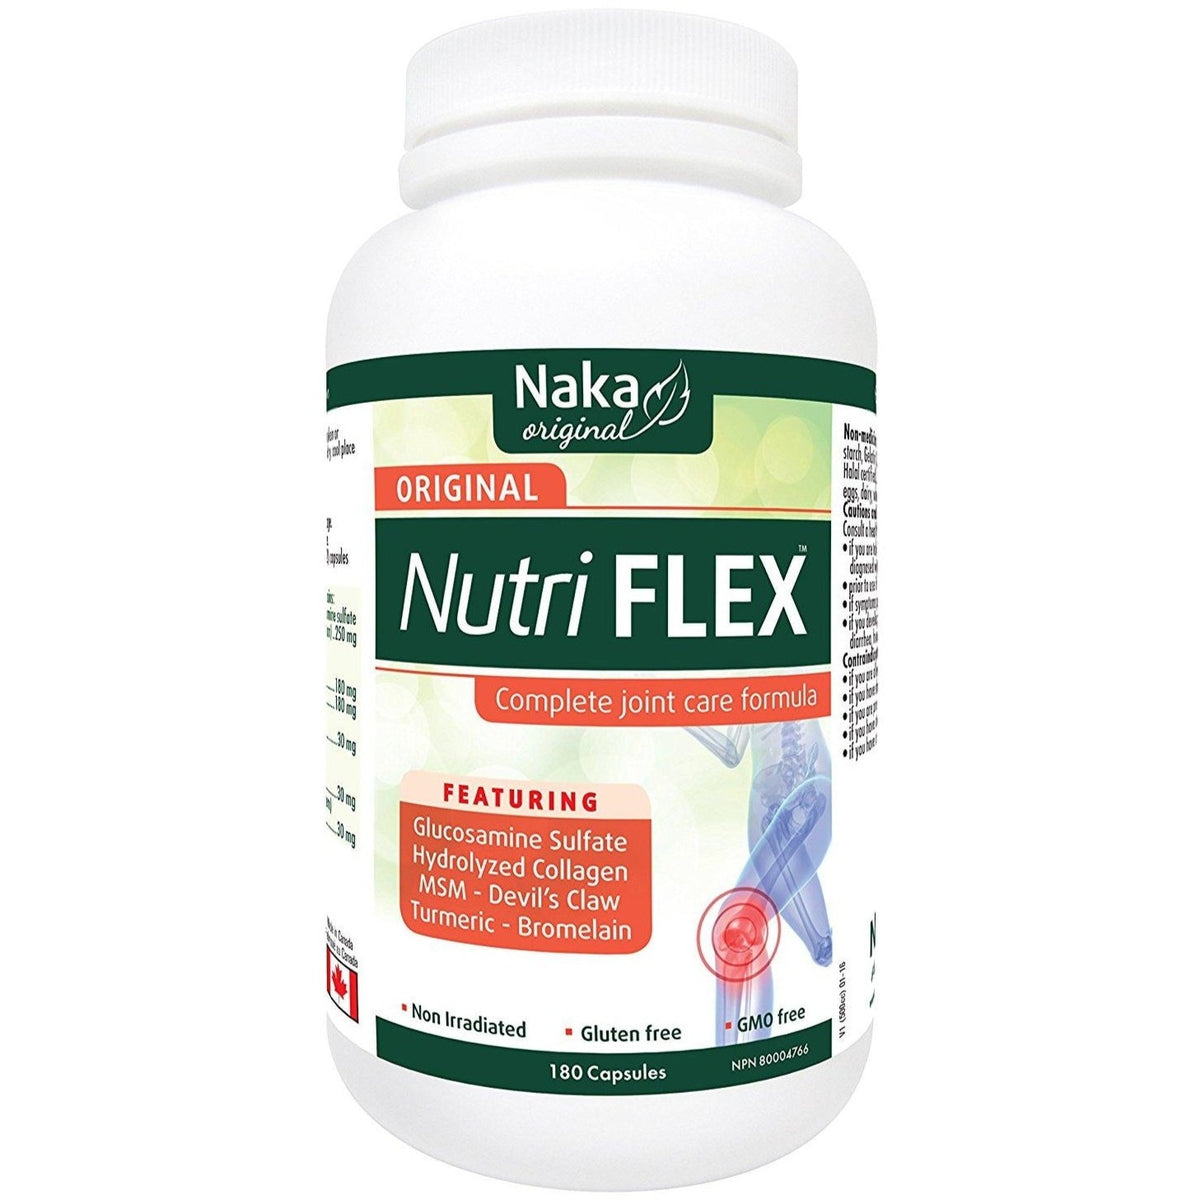 Naka Nutri-Flex Complete Joint Care Formula 180 Caps Supplements - Joint Care at Village Vitamin Store